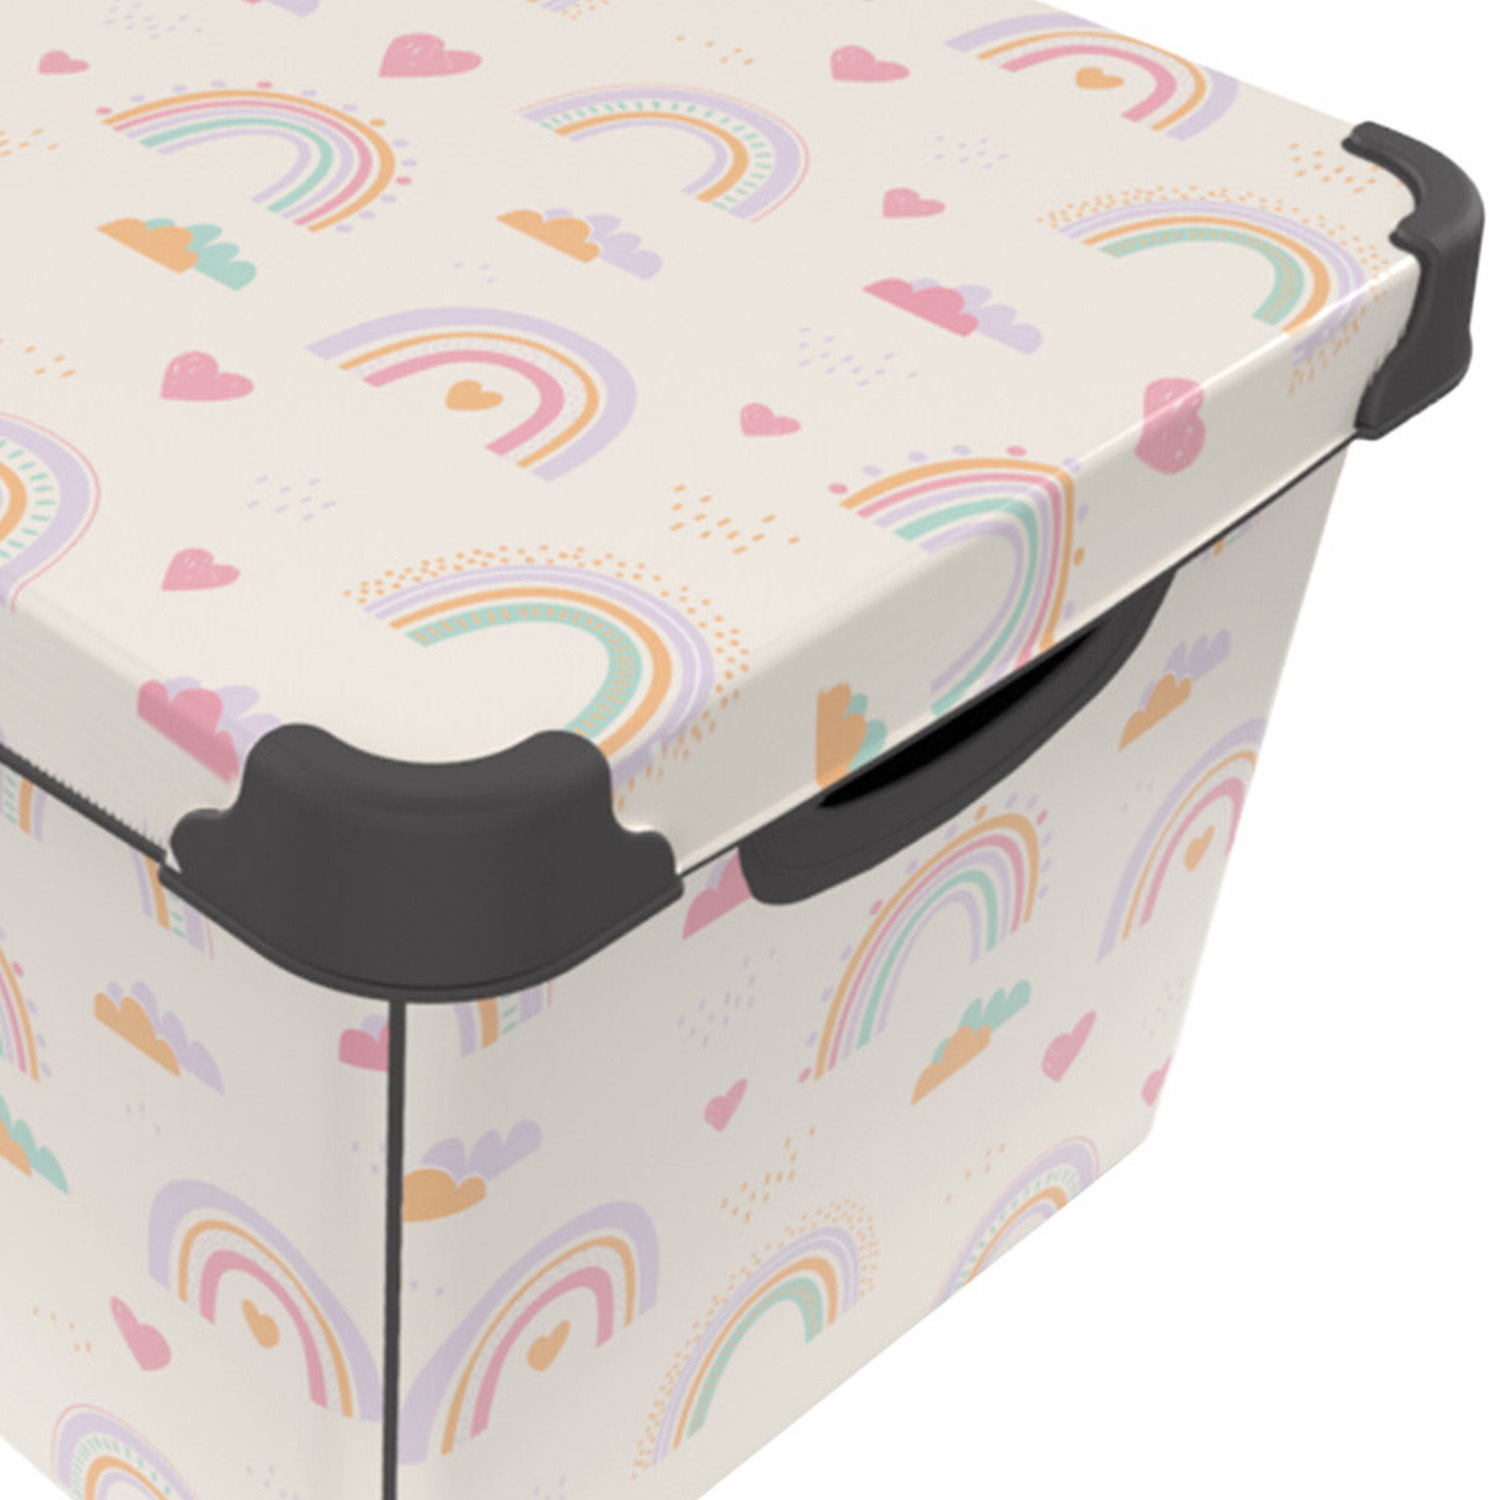 17L Rainbow Patterned Storage Box with Lid Image 3